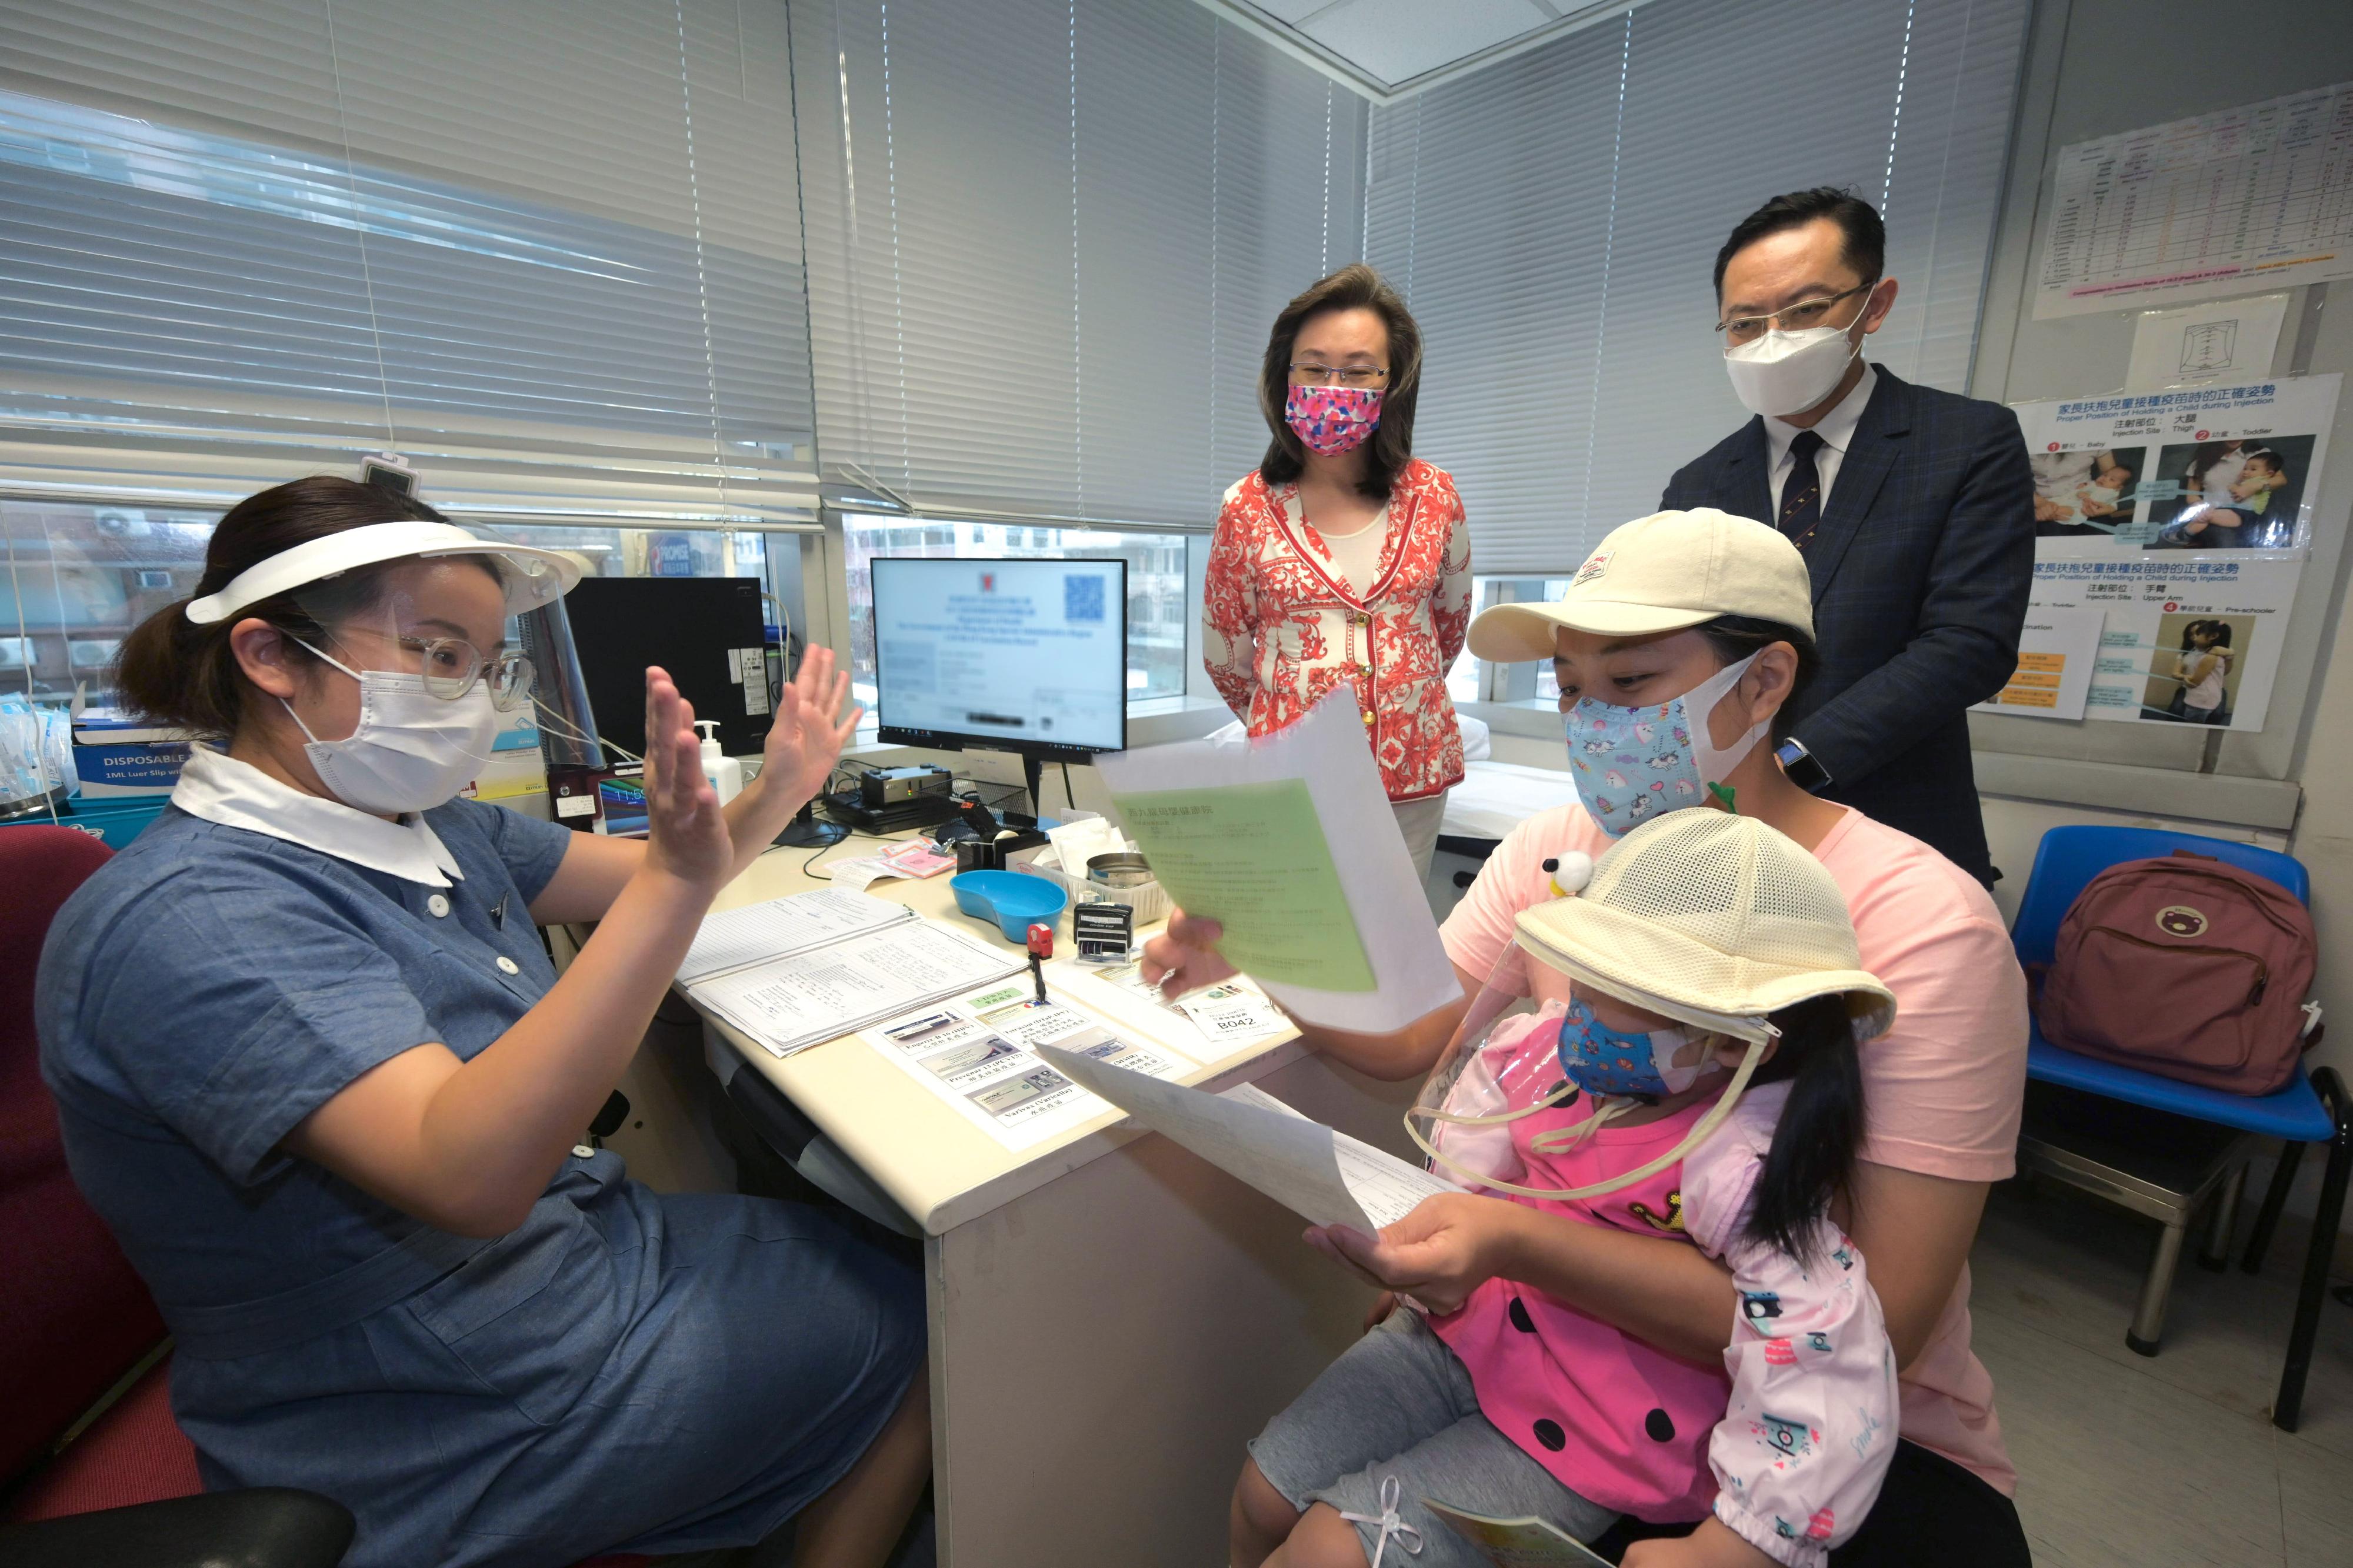 The Secretary for the Civil Service, Mrs Ingrid Yeung, today (August 23) visited West Kowloon Maternal and Child Health Centre to learn about the arrangements of providing a COVID-19 vaccination service for children there. Photo shows a young child who was given her vaccination record after getting vaccinated. Mrs Yeung (back row, left); the Director of Health, Dr Ronald Lam (back row, right); and the nurse who administered the vaccine gave encouragement to the child.